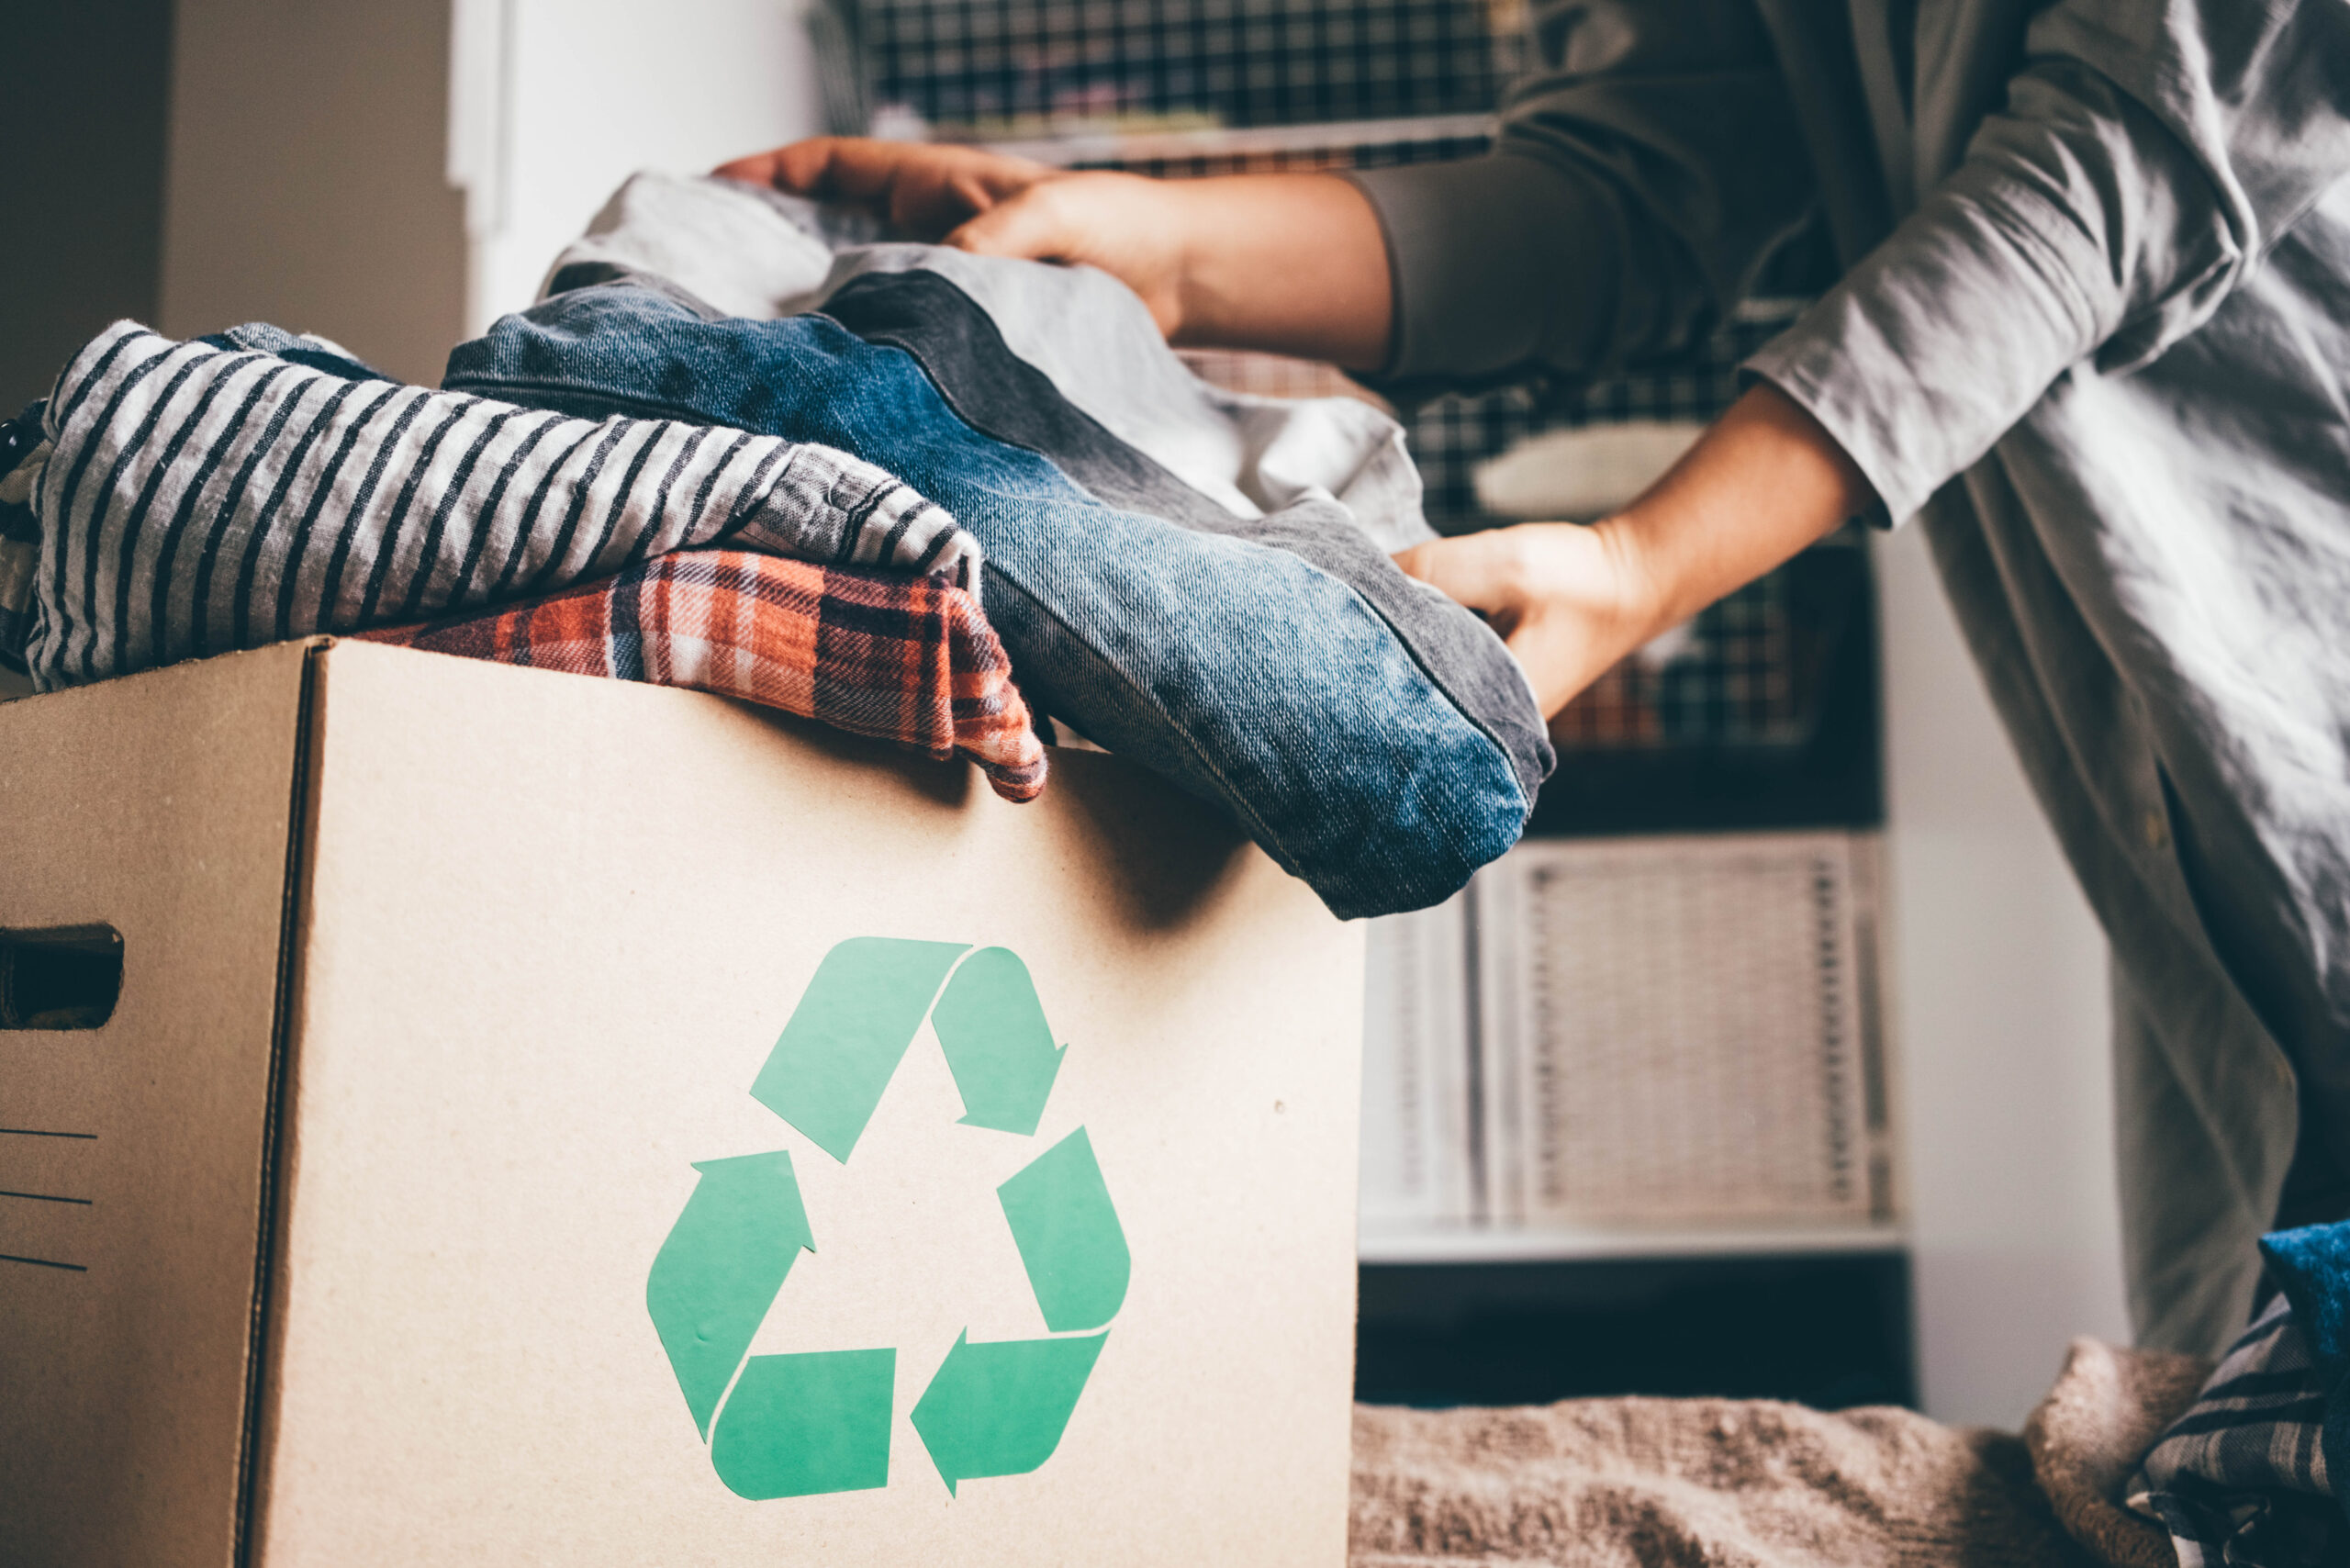 Wasteful returns policies are costing the earth, retail expert warns